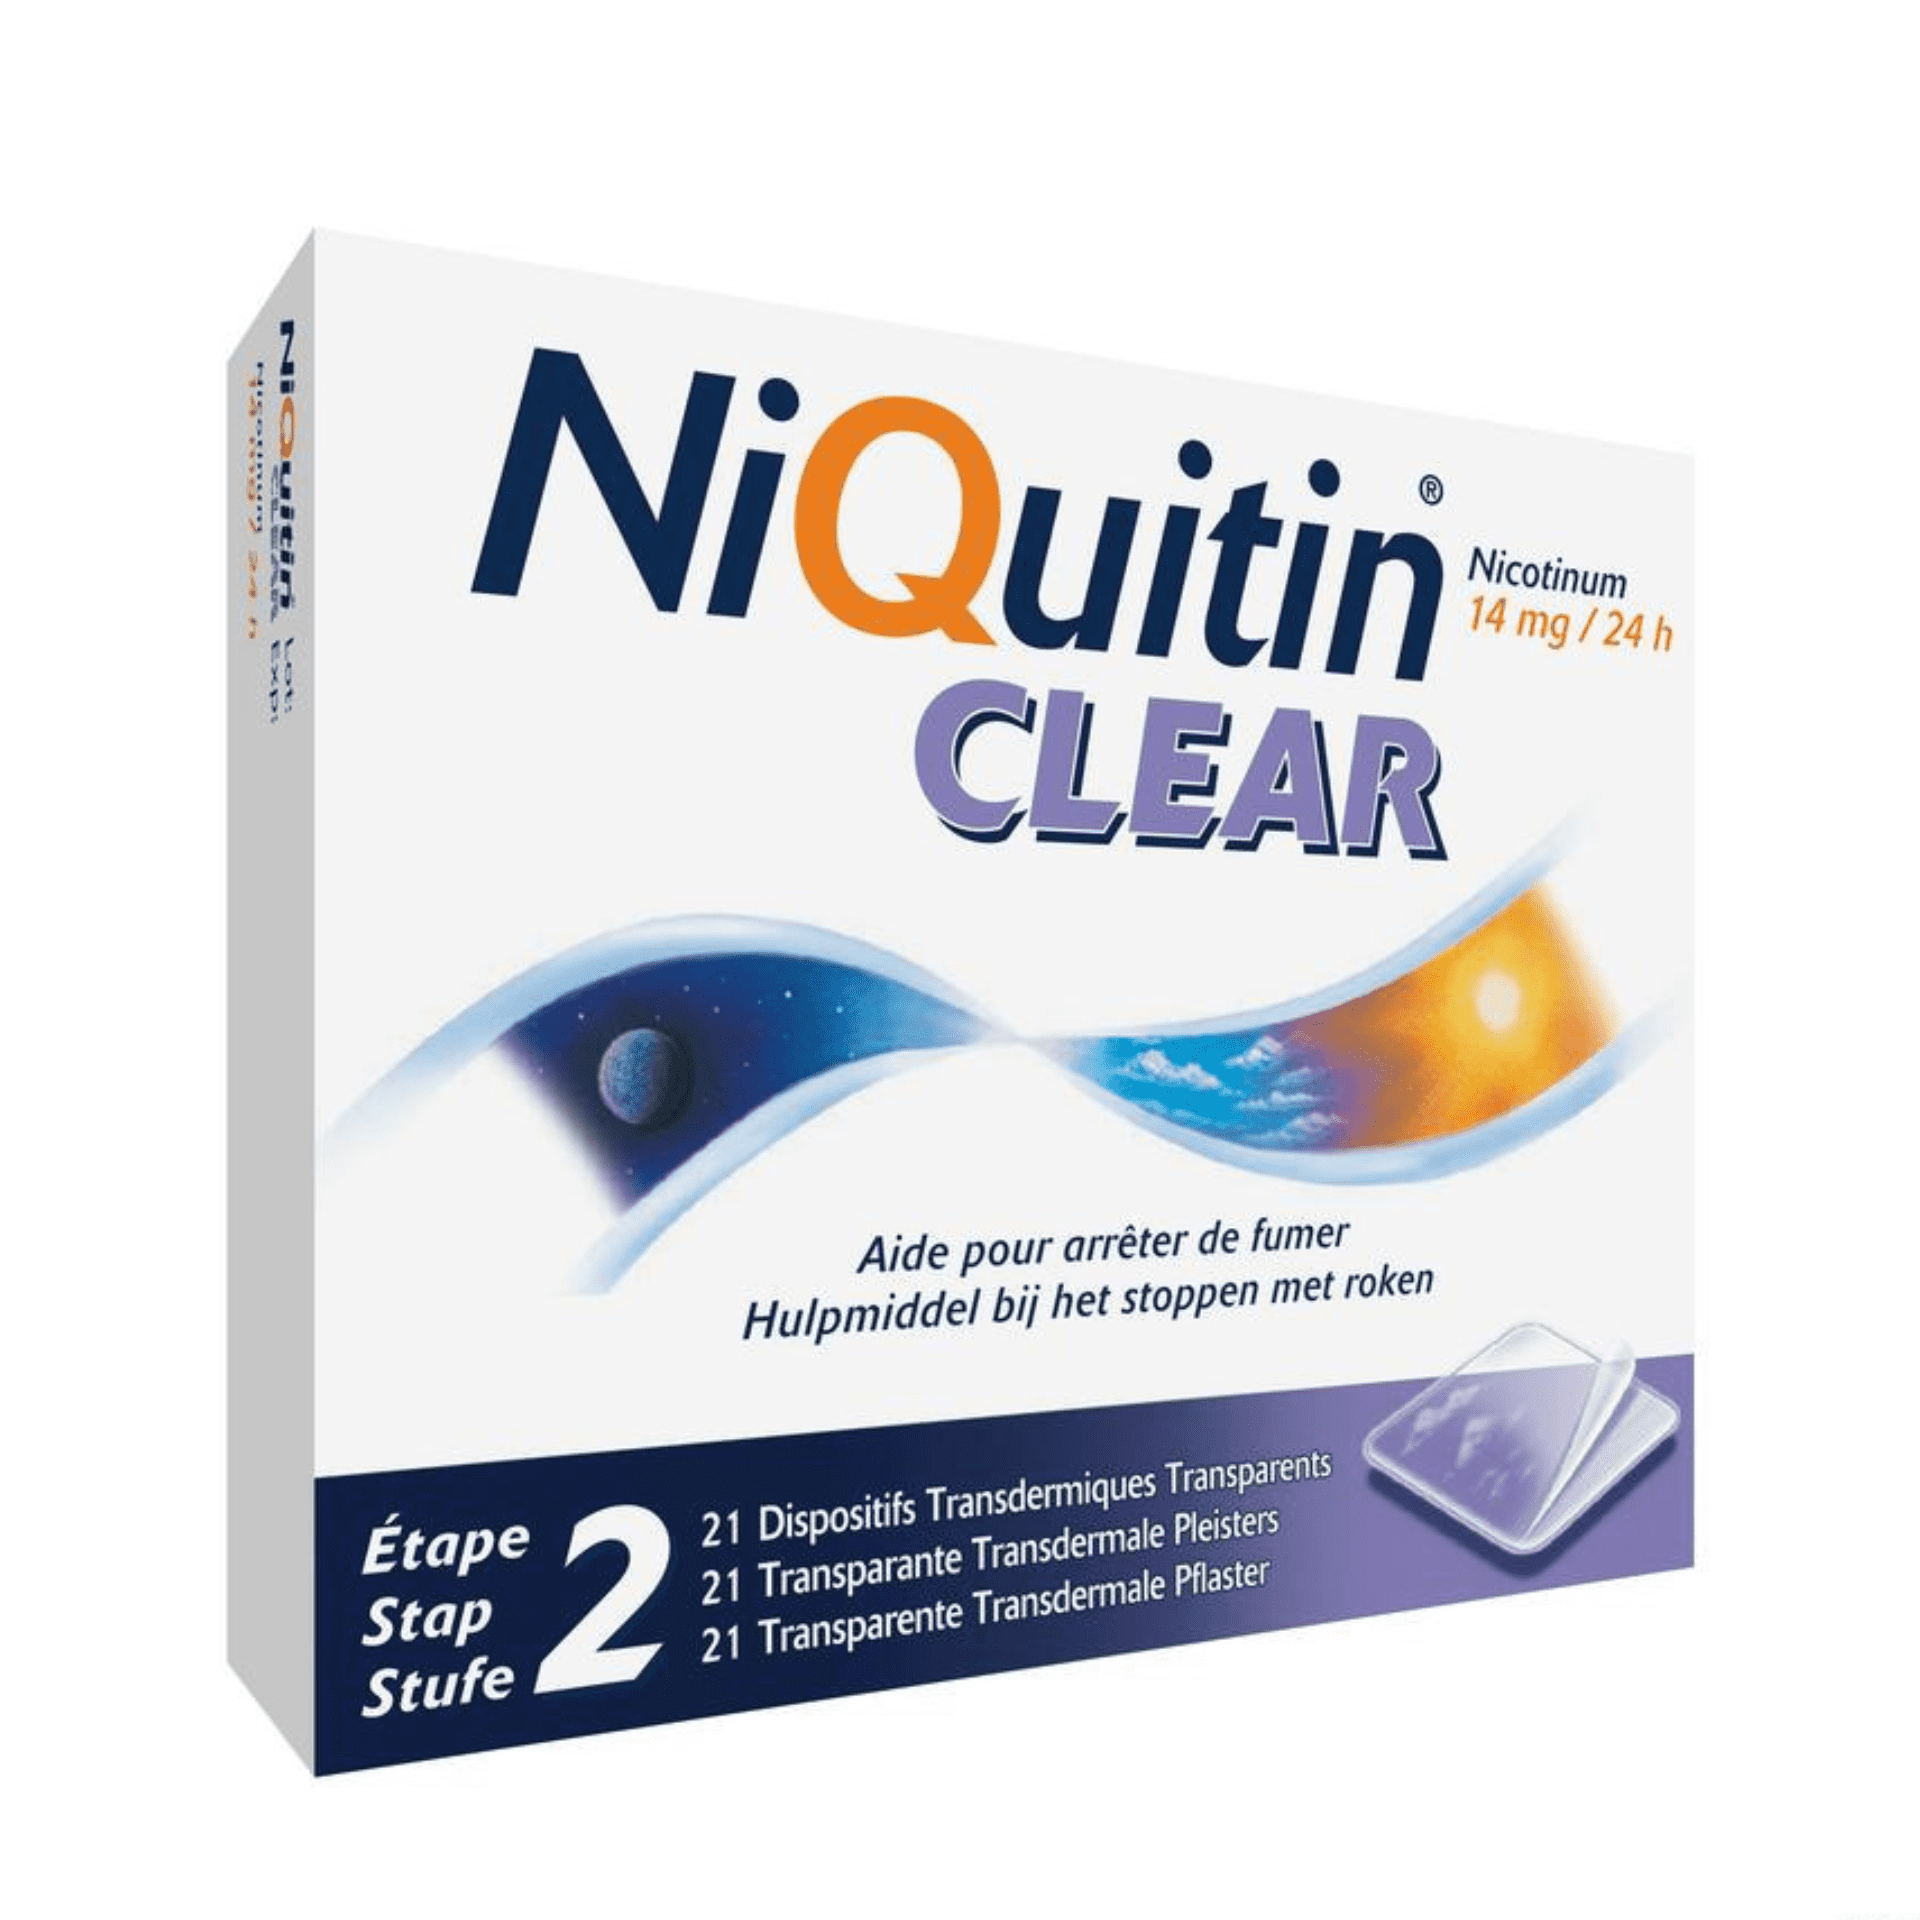 Niquitin Clear Patches 14 mg